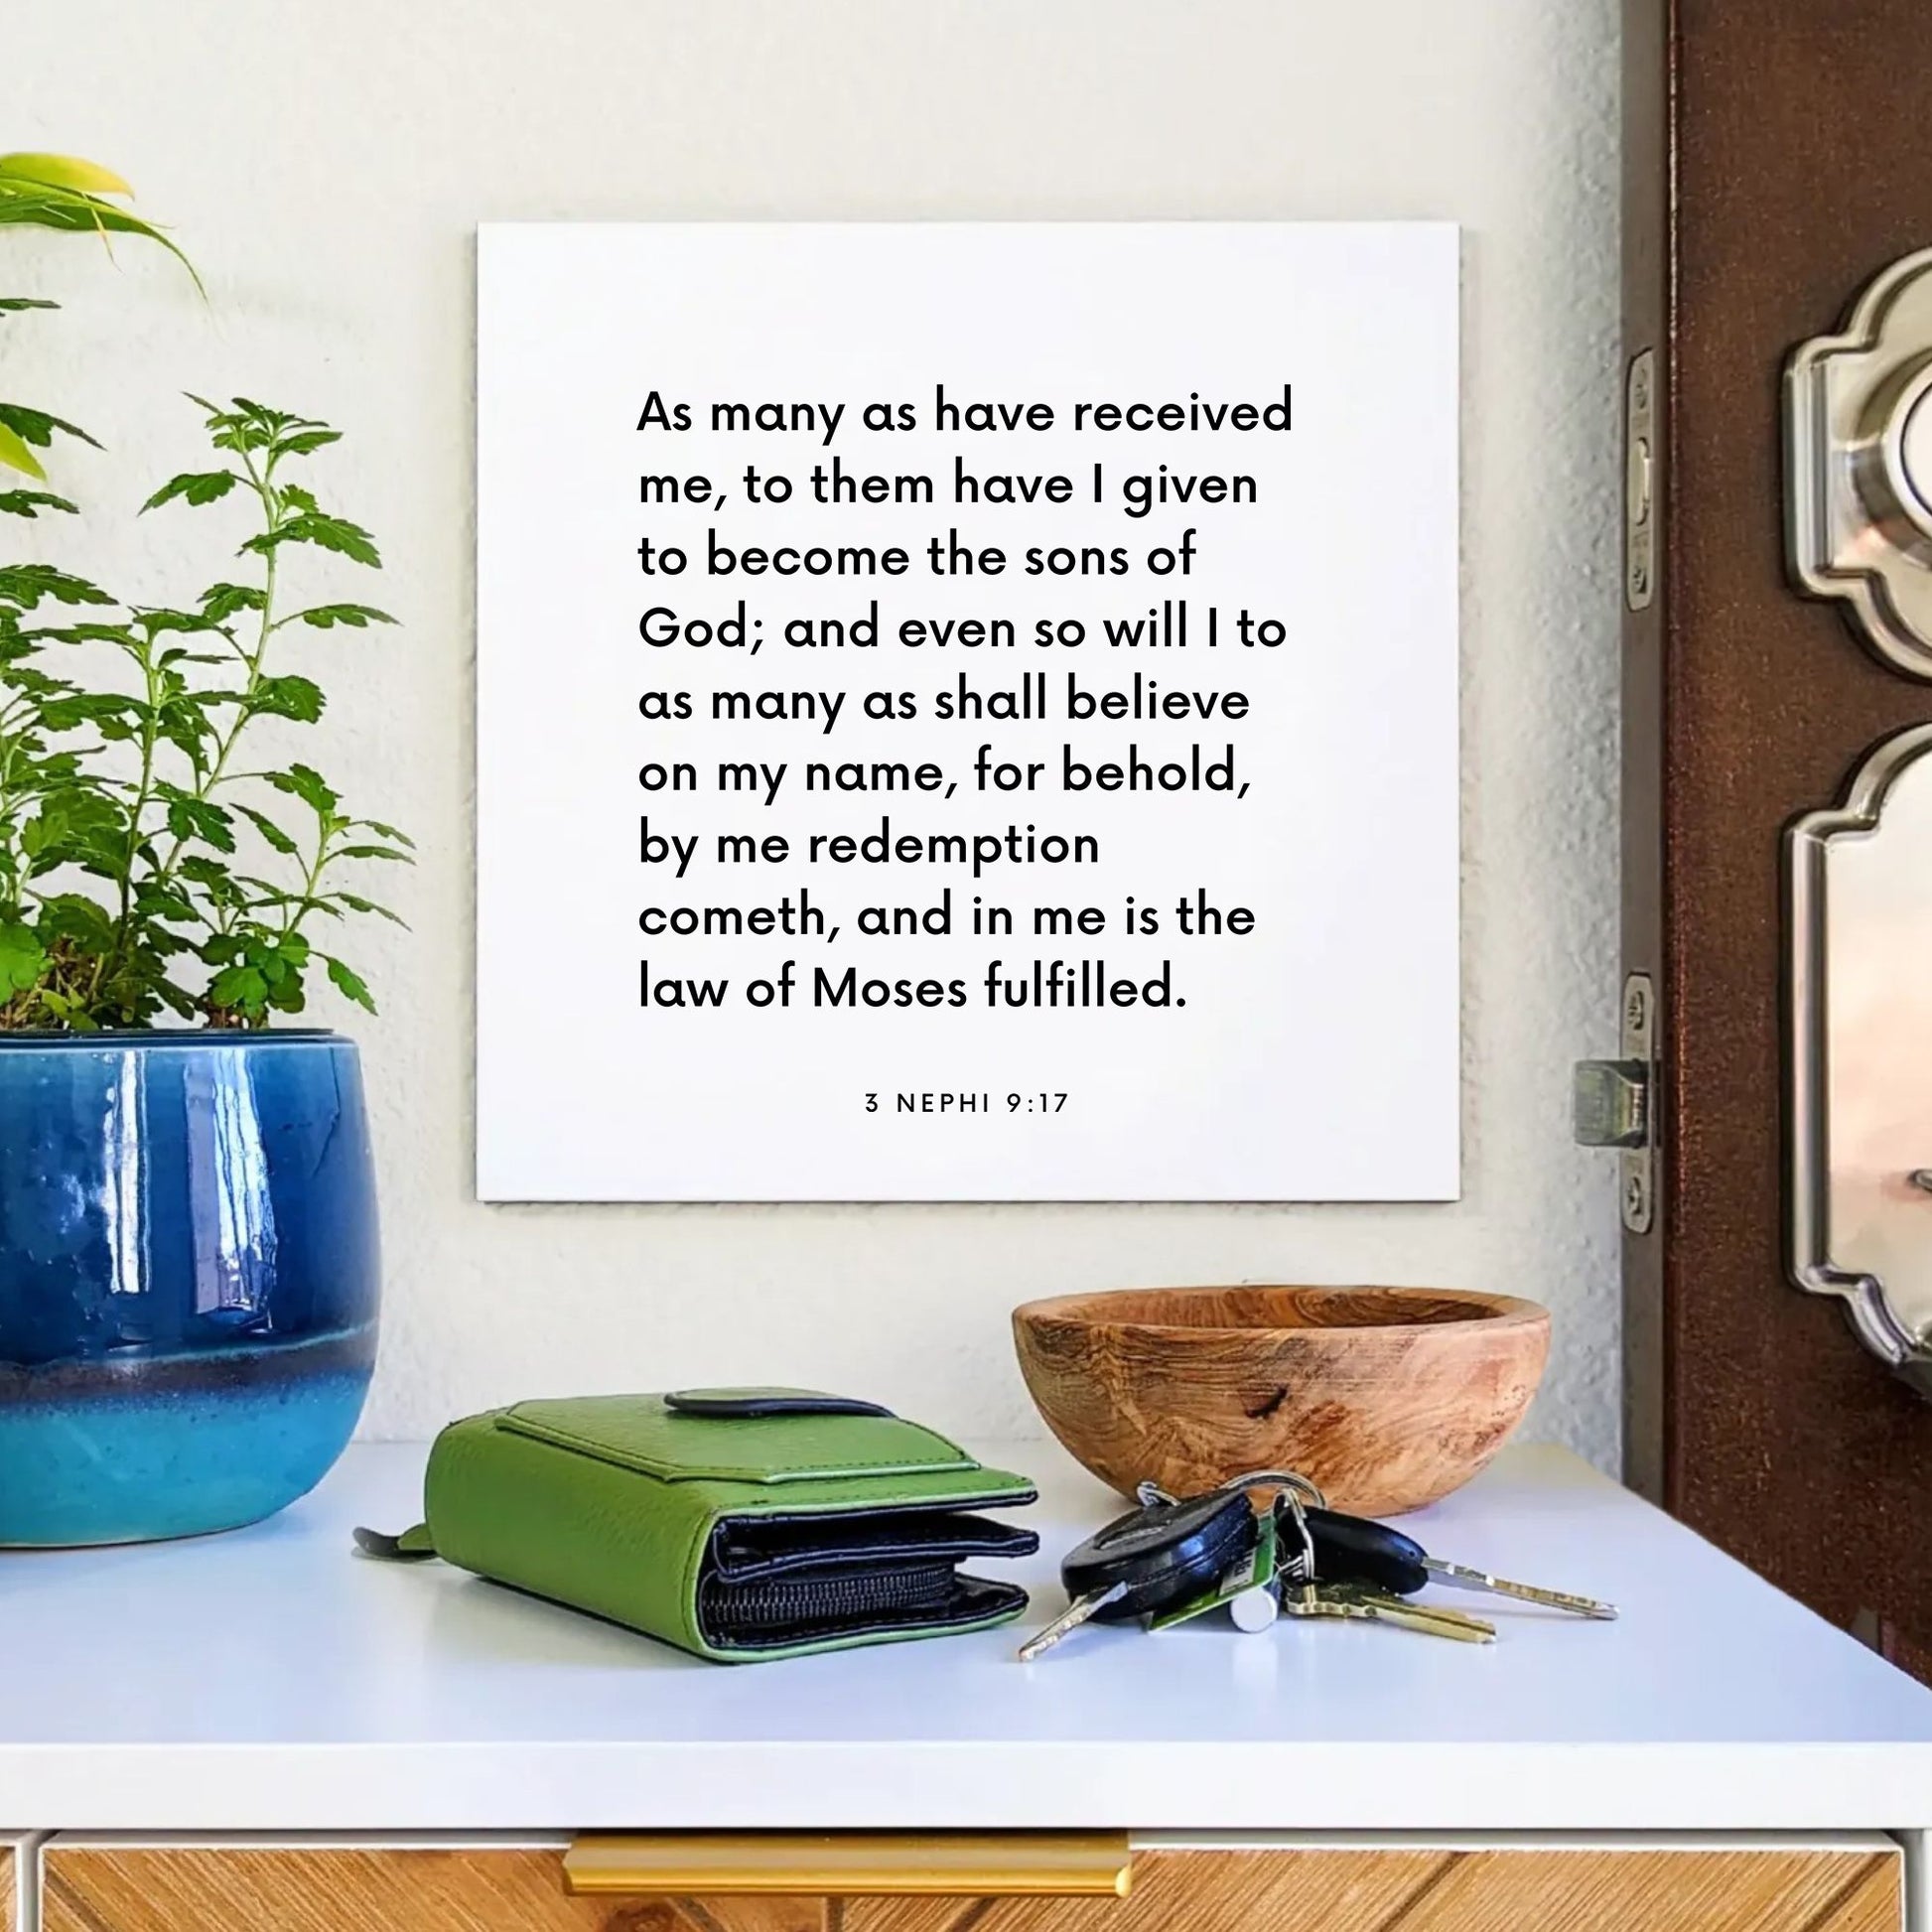 Entryway mouting of the scripture tile for 3 Nephi 9:17 - "Behold, by me redemption cometh"